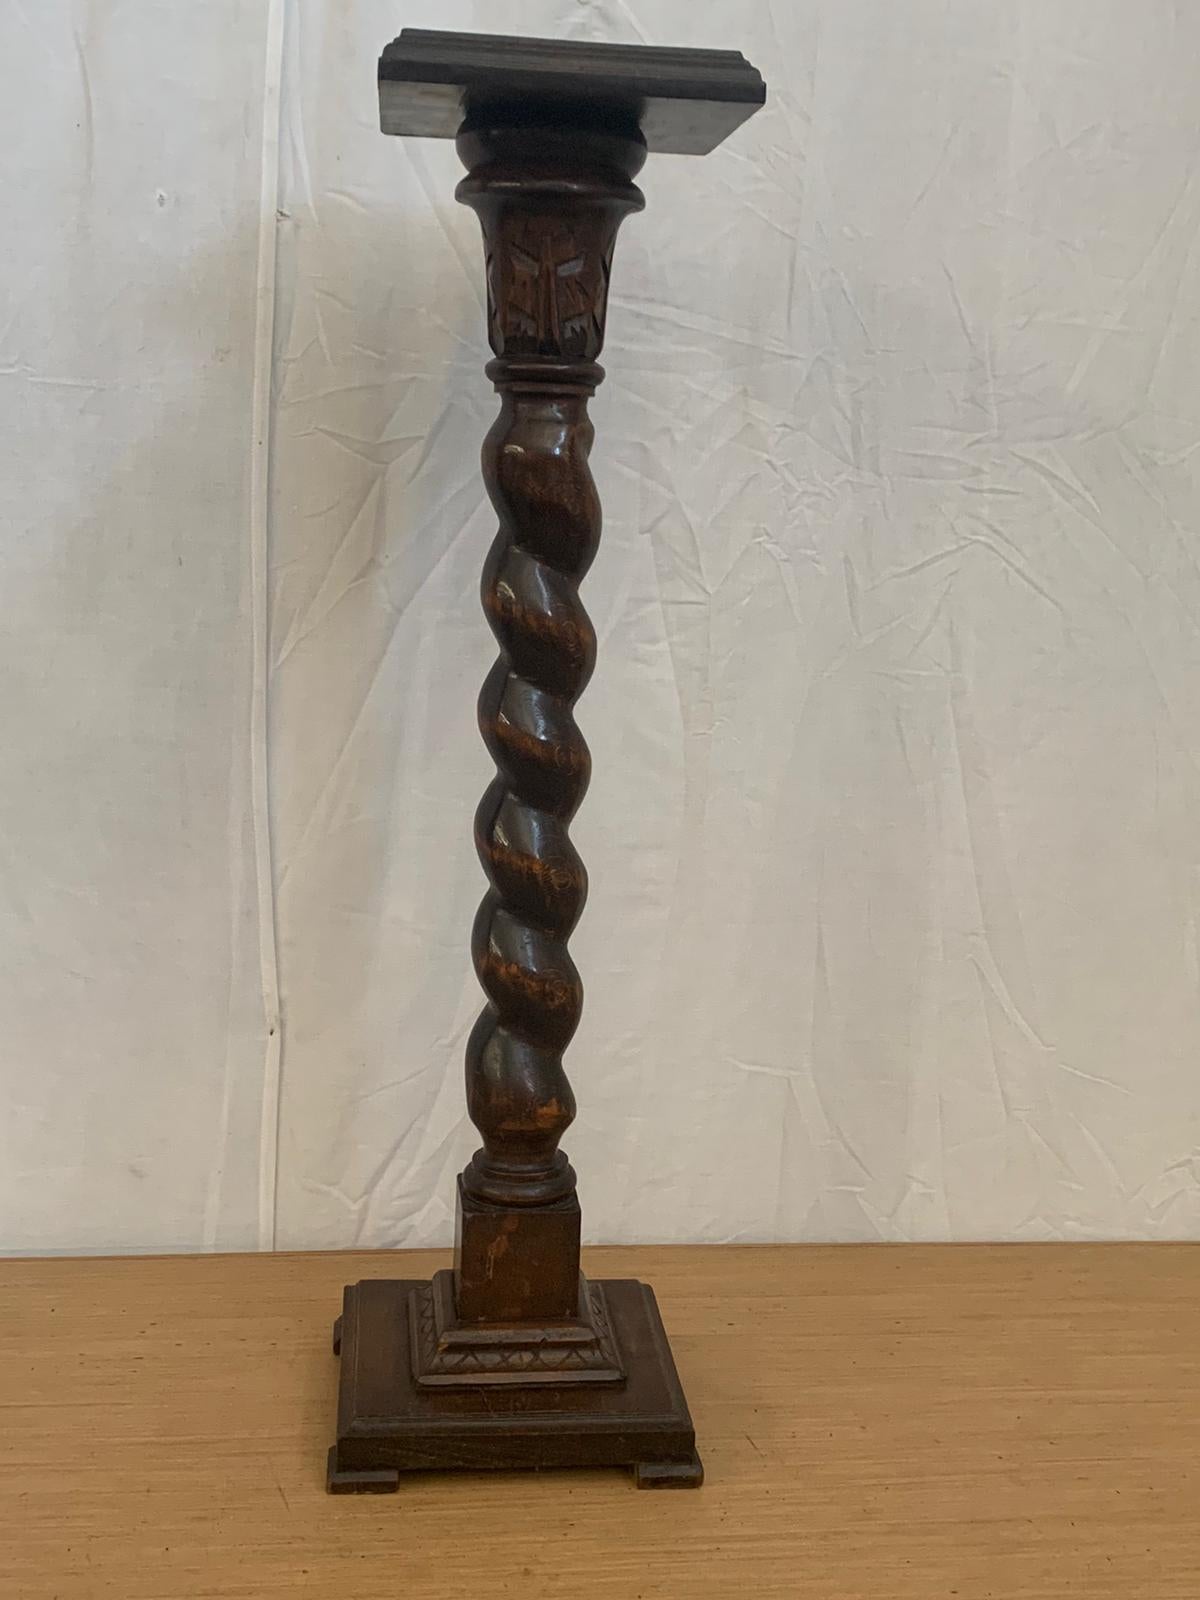 19th century Twisting pedestal table.
Packaging with bubble wrap and cardboard boxes is included. If the wooden packaging is needed (fumigated crates or boxes) for US and International Shipping, it's required a separate cost (will be quoted